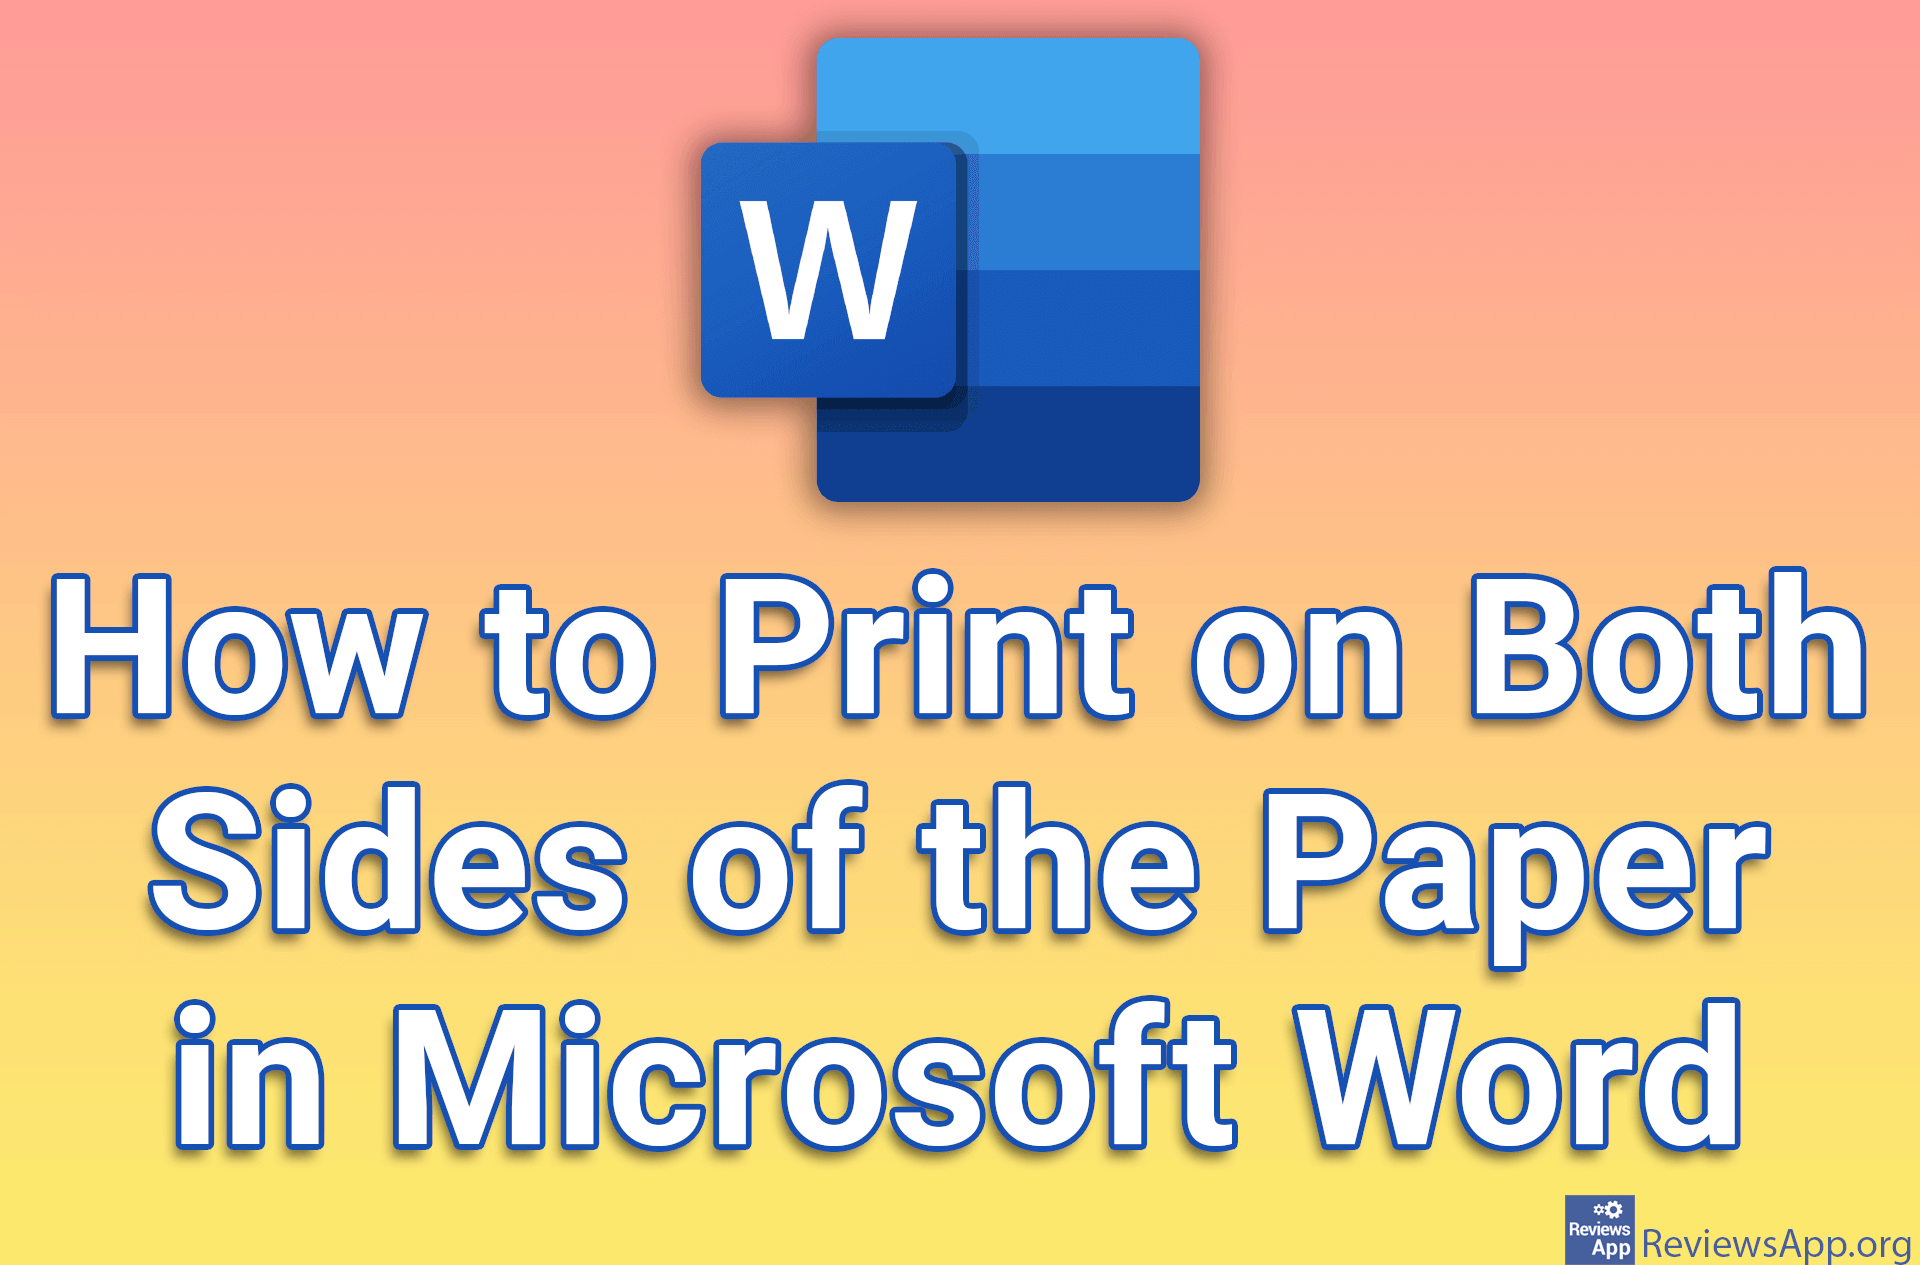 How to Print on Both Sides of the Paper in Microsoft Word